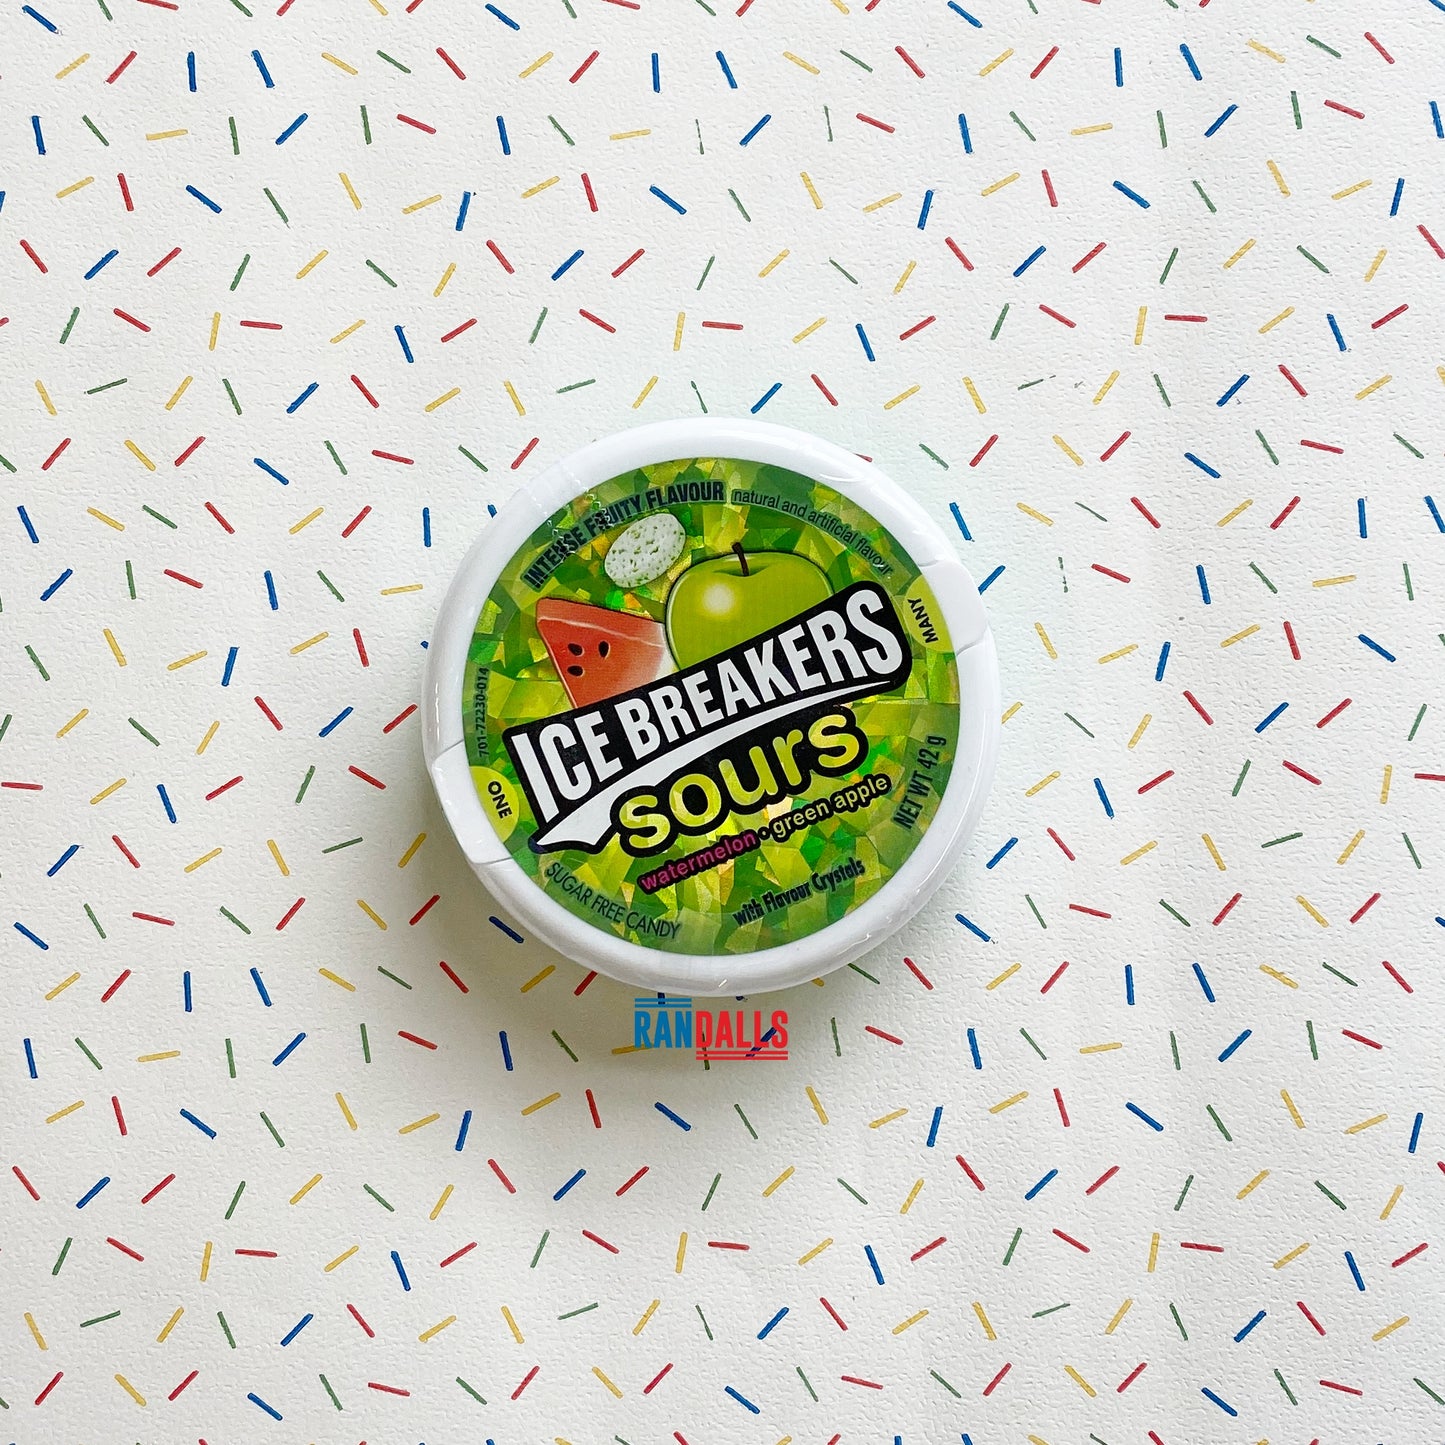 ice breakers sours watermelon, green apple, mint, candy, sweets, usa, randalls